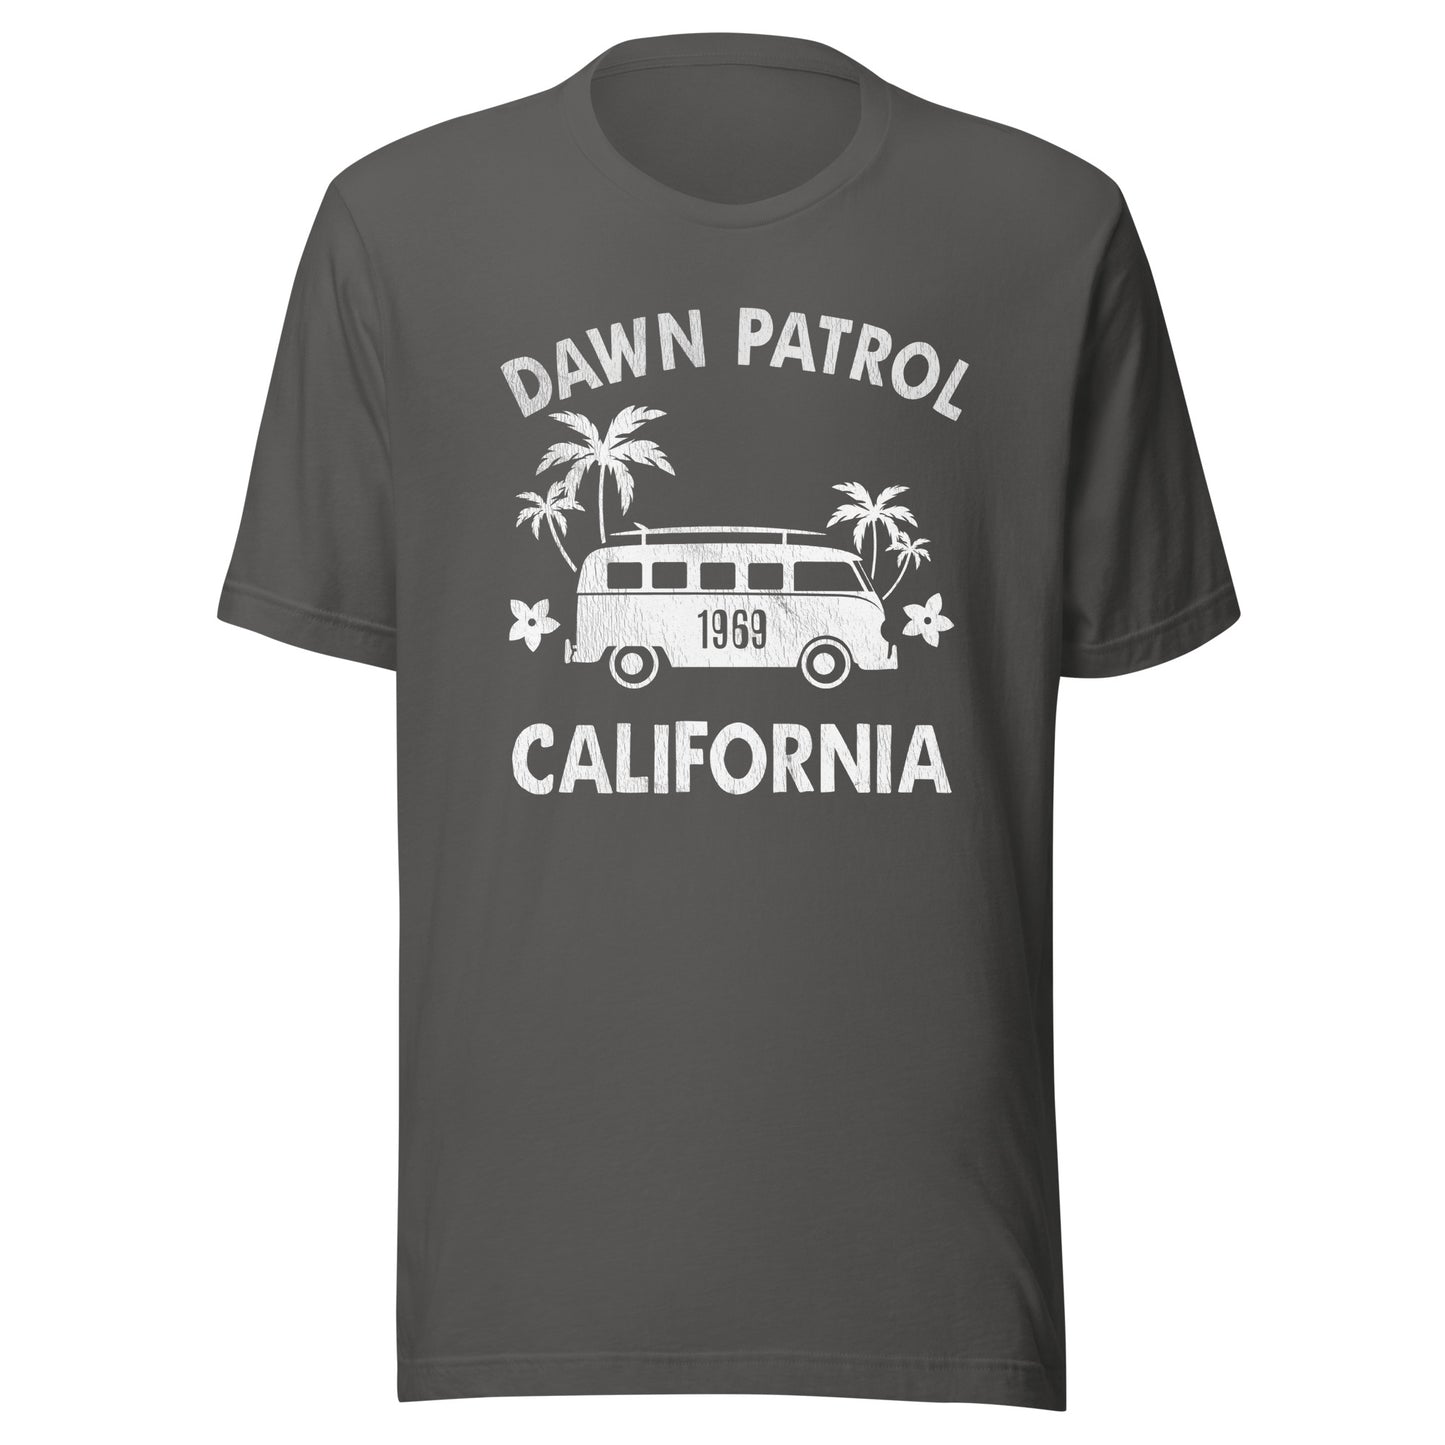 Dawn Patrol California  - available in 13 colors